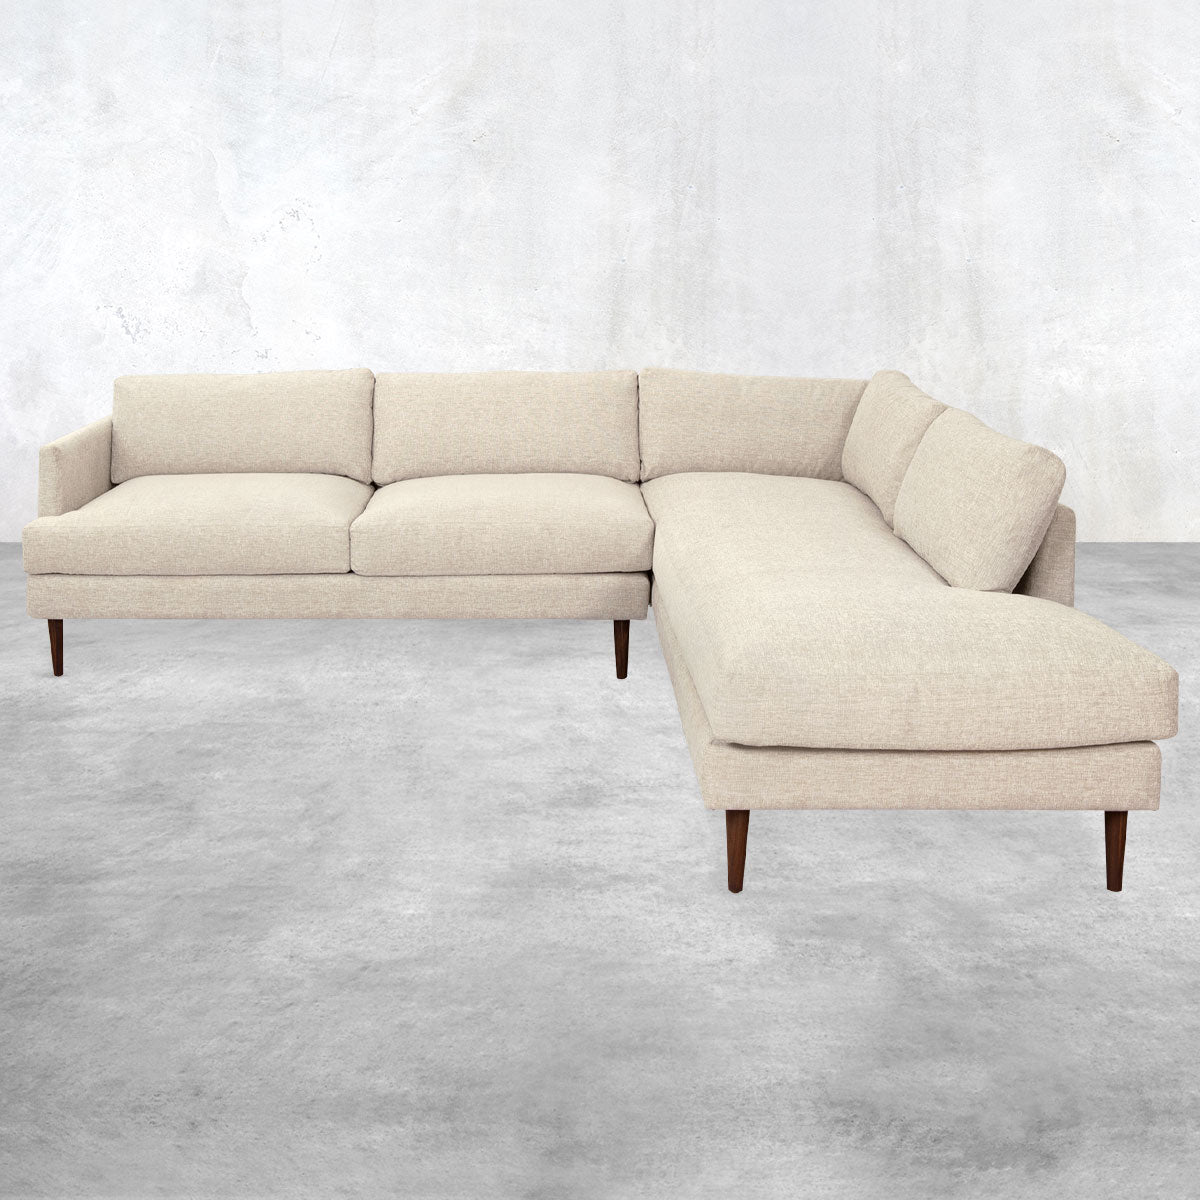 Two-piece sectional sofa with a chaise end, overstuffed pillow back, brown cone legs and light beige upholstery.